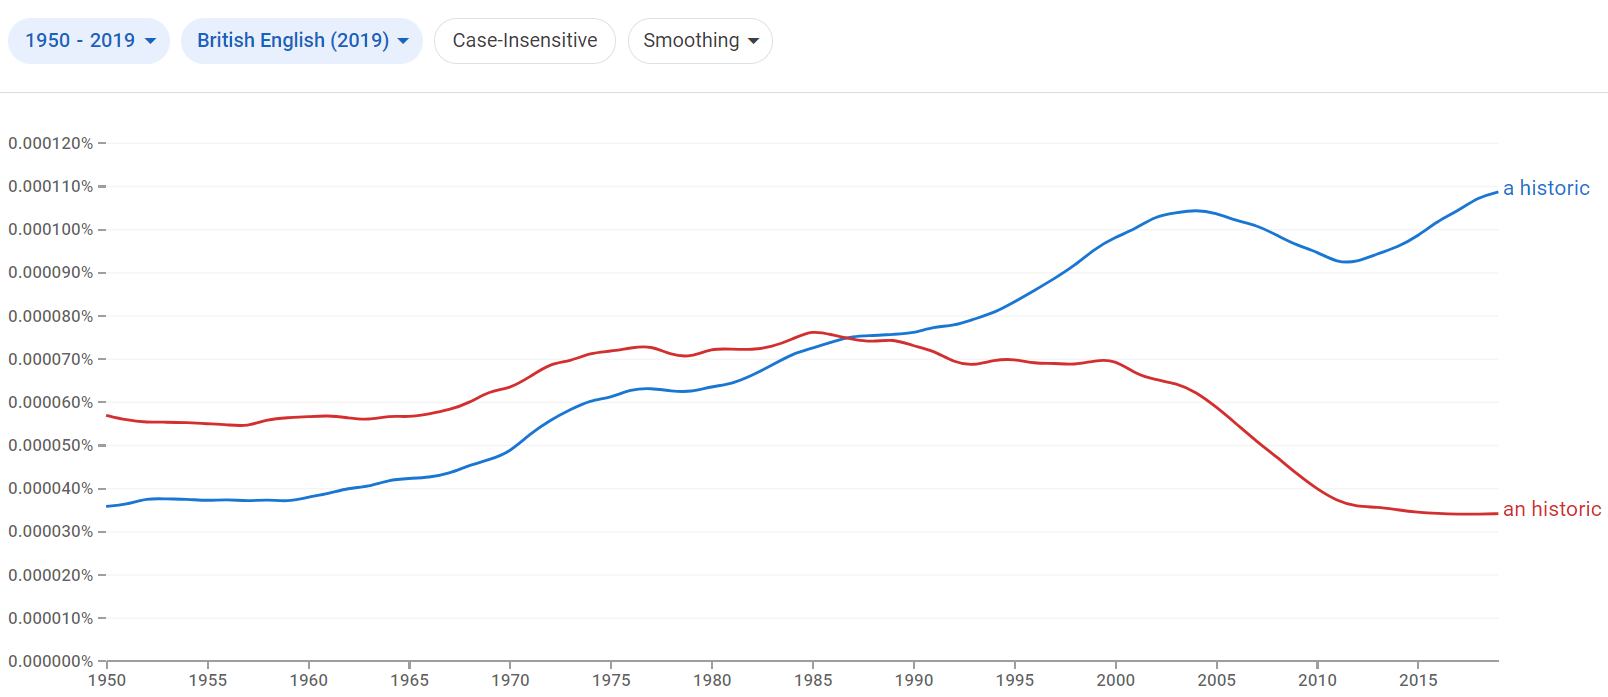 Relative frequency of the phrases a historic and an historic in British English